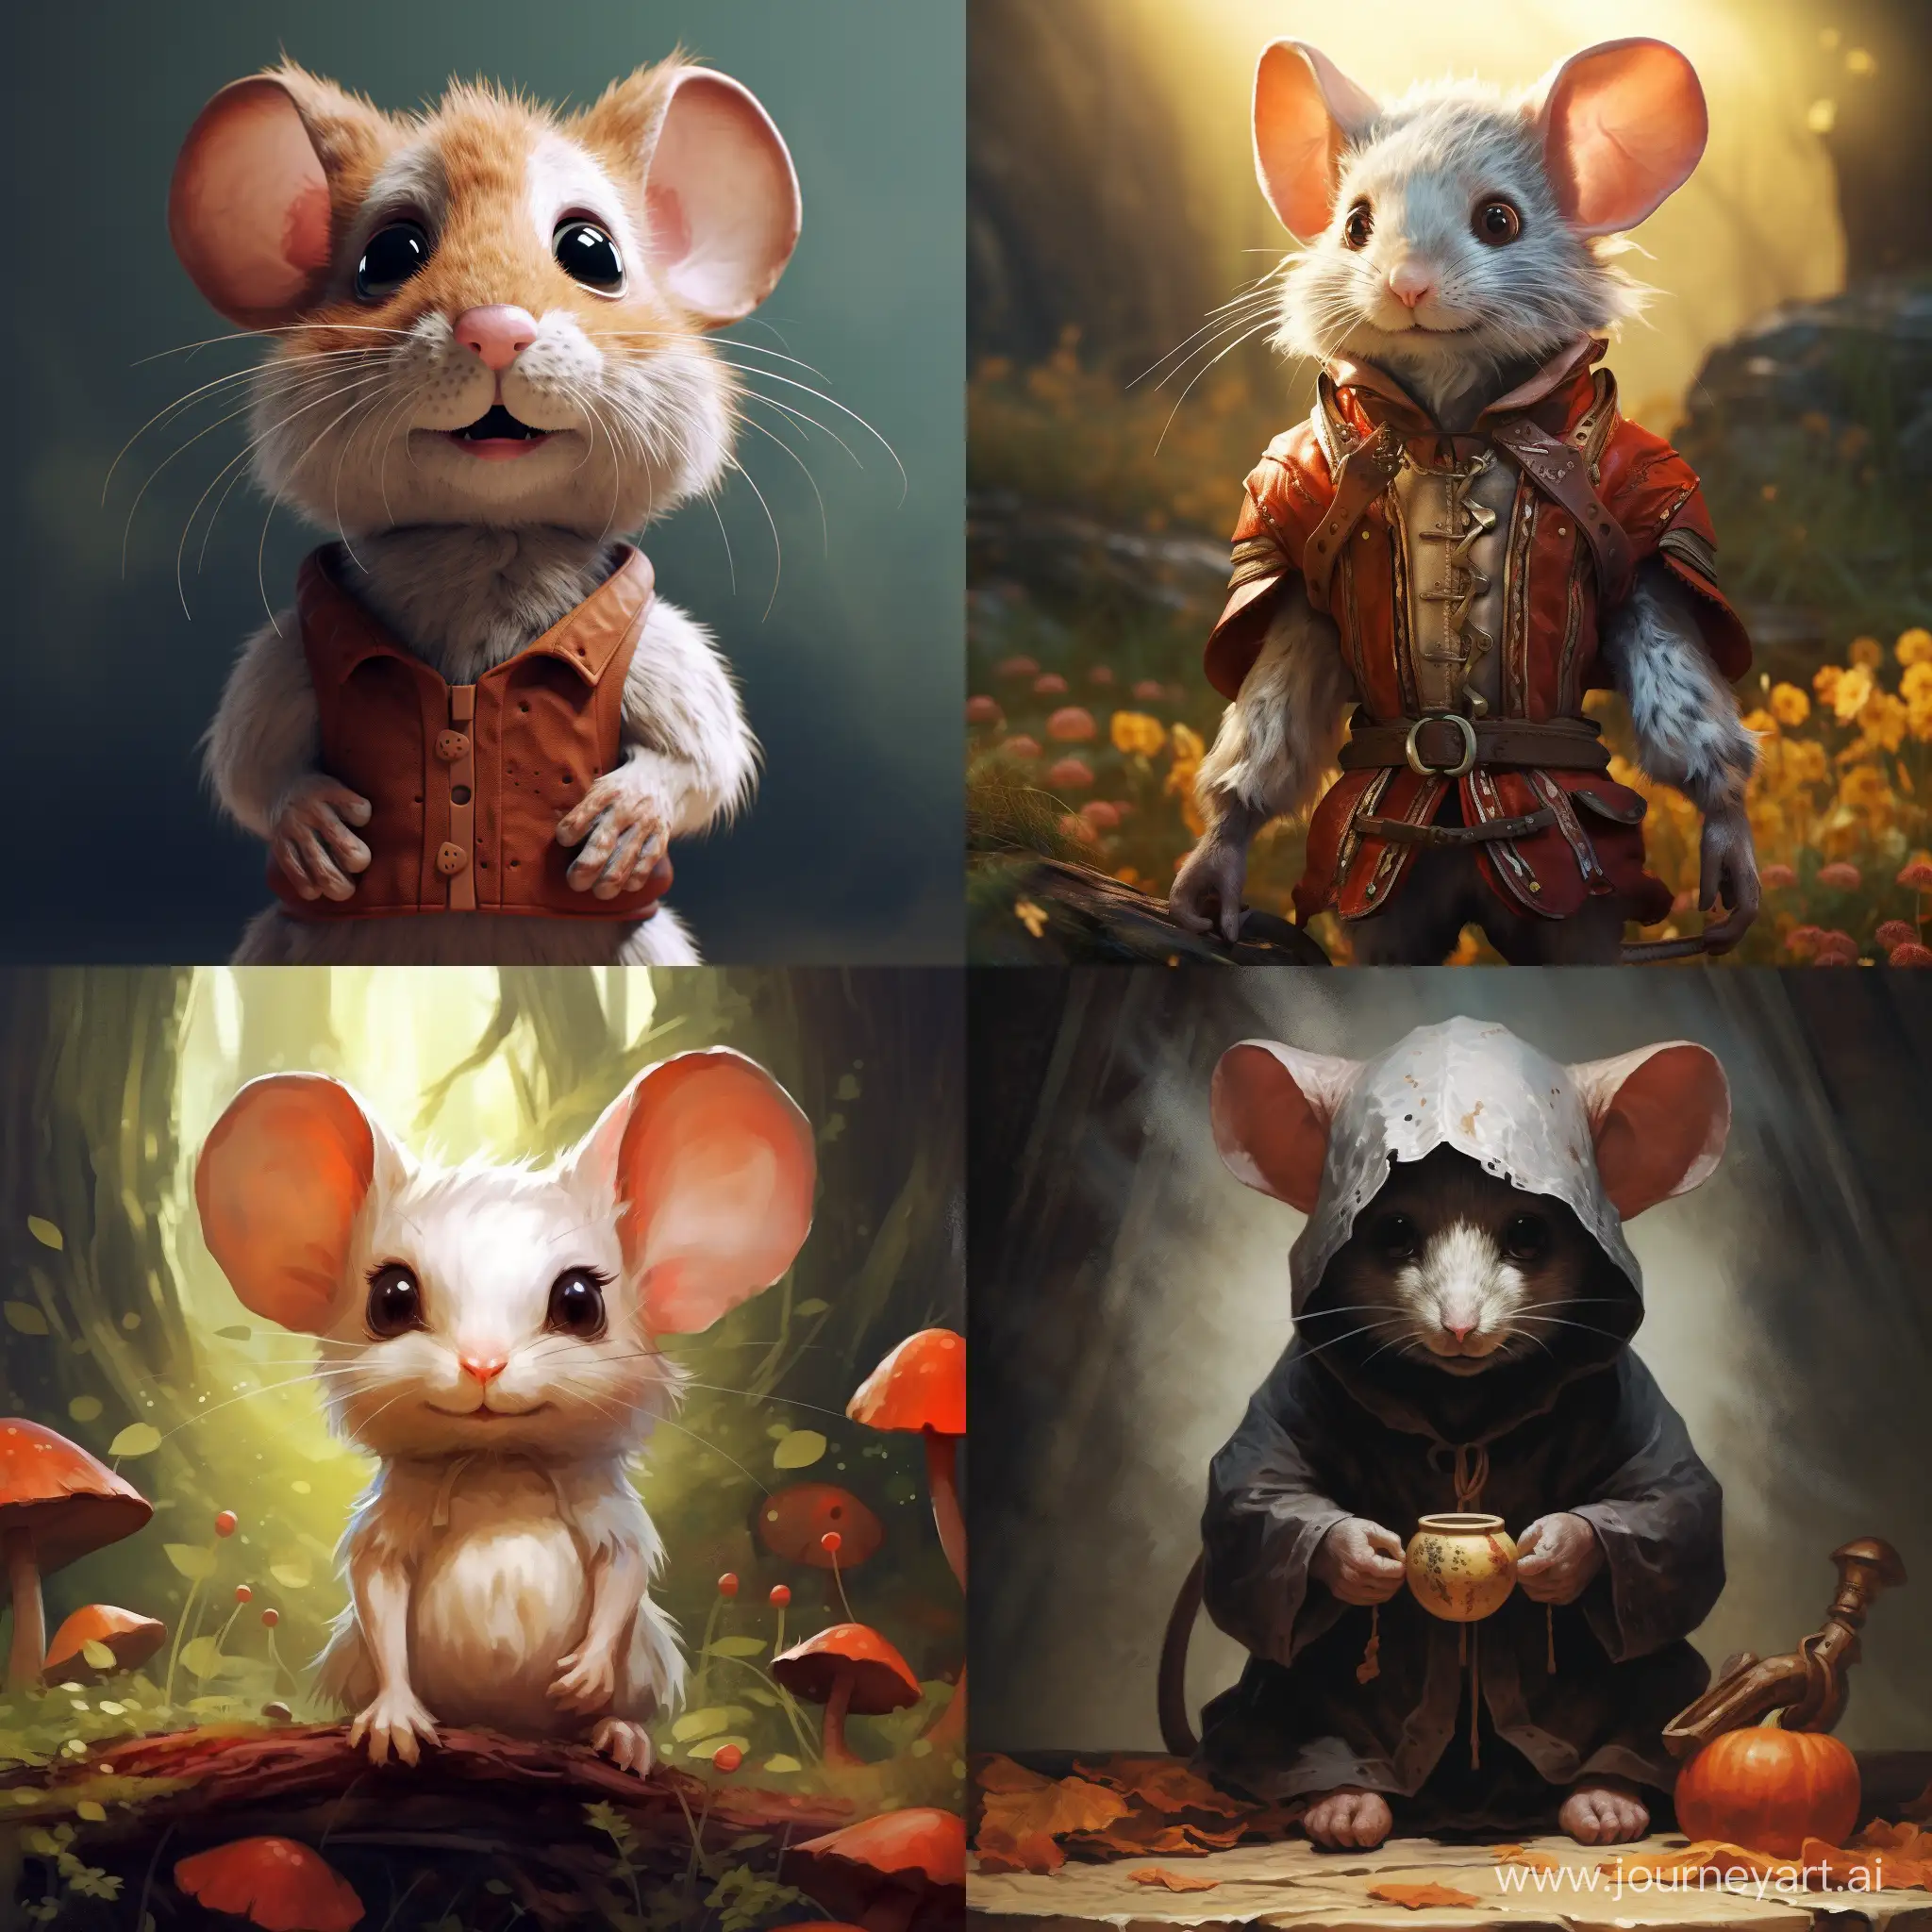 Adorable-Mouse-with-Artistic-Flair-in-a-11-Aspect-Ratio